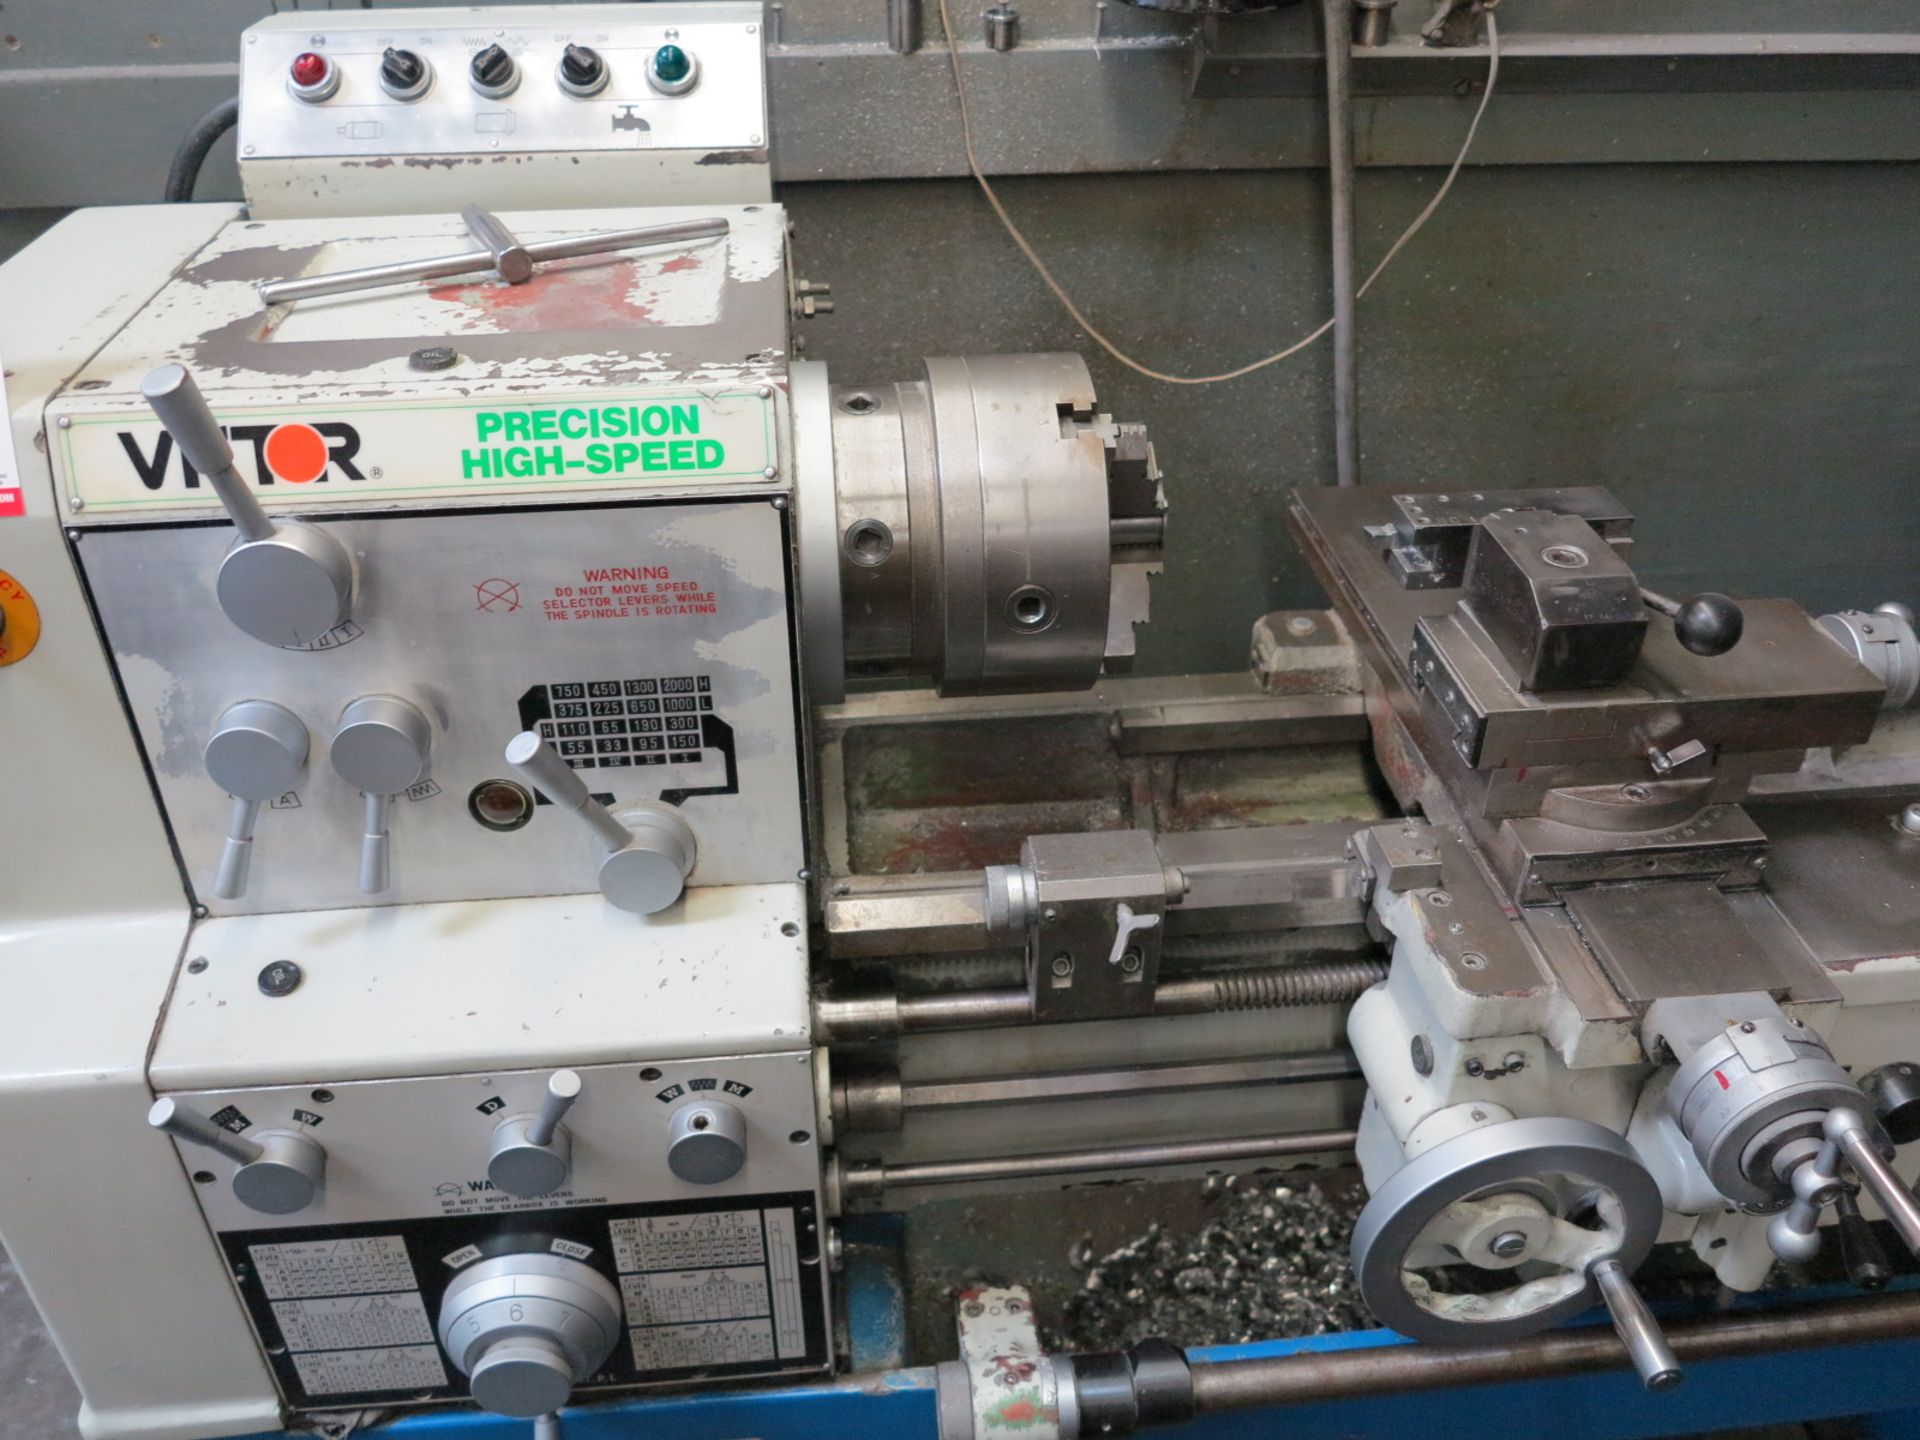 VICTOR PRECISION HIGH-SPEED LATHE, MODEL 1630B - Image 4 of 5